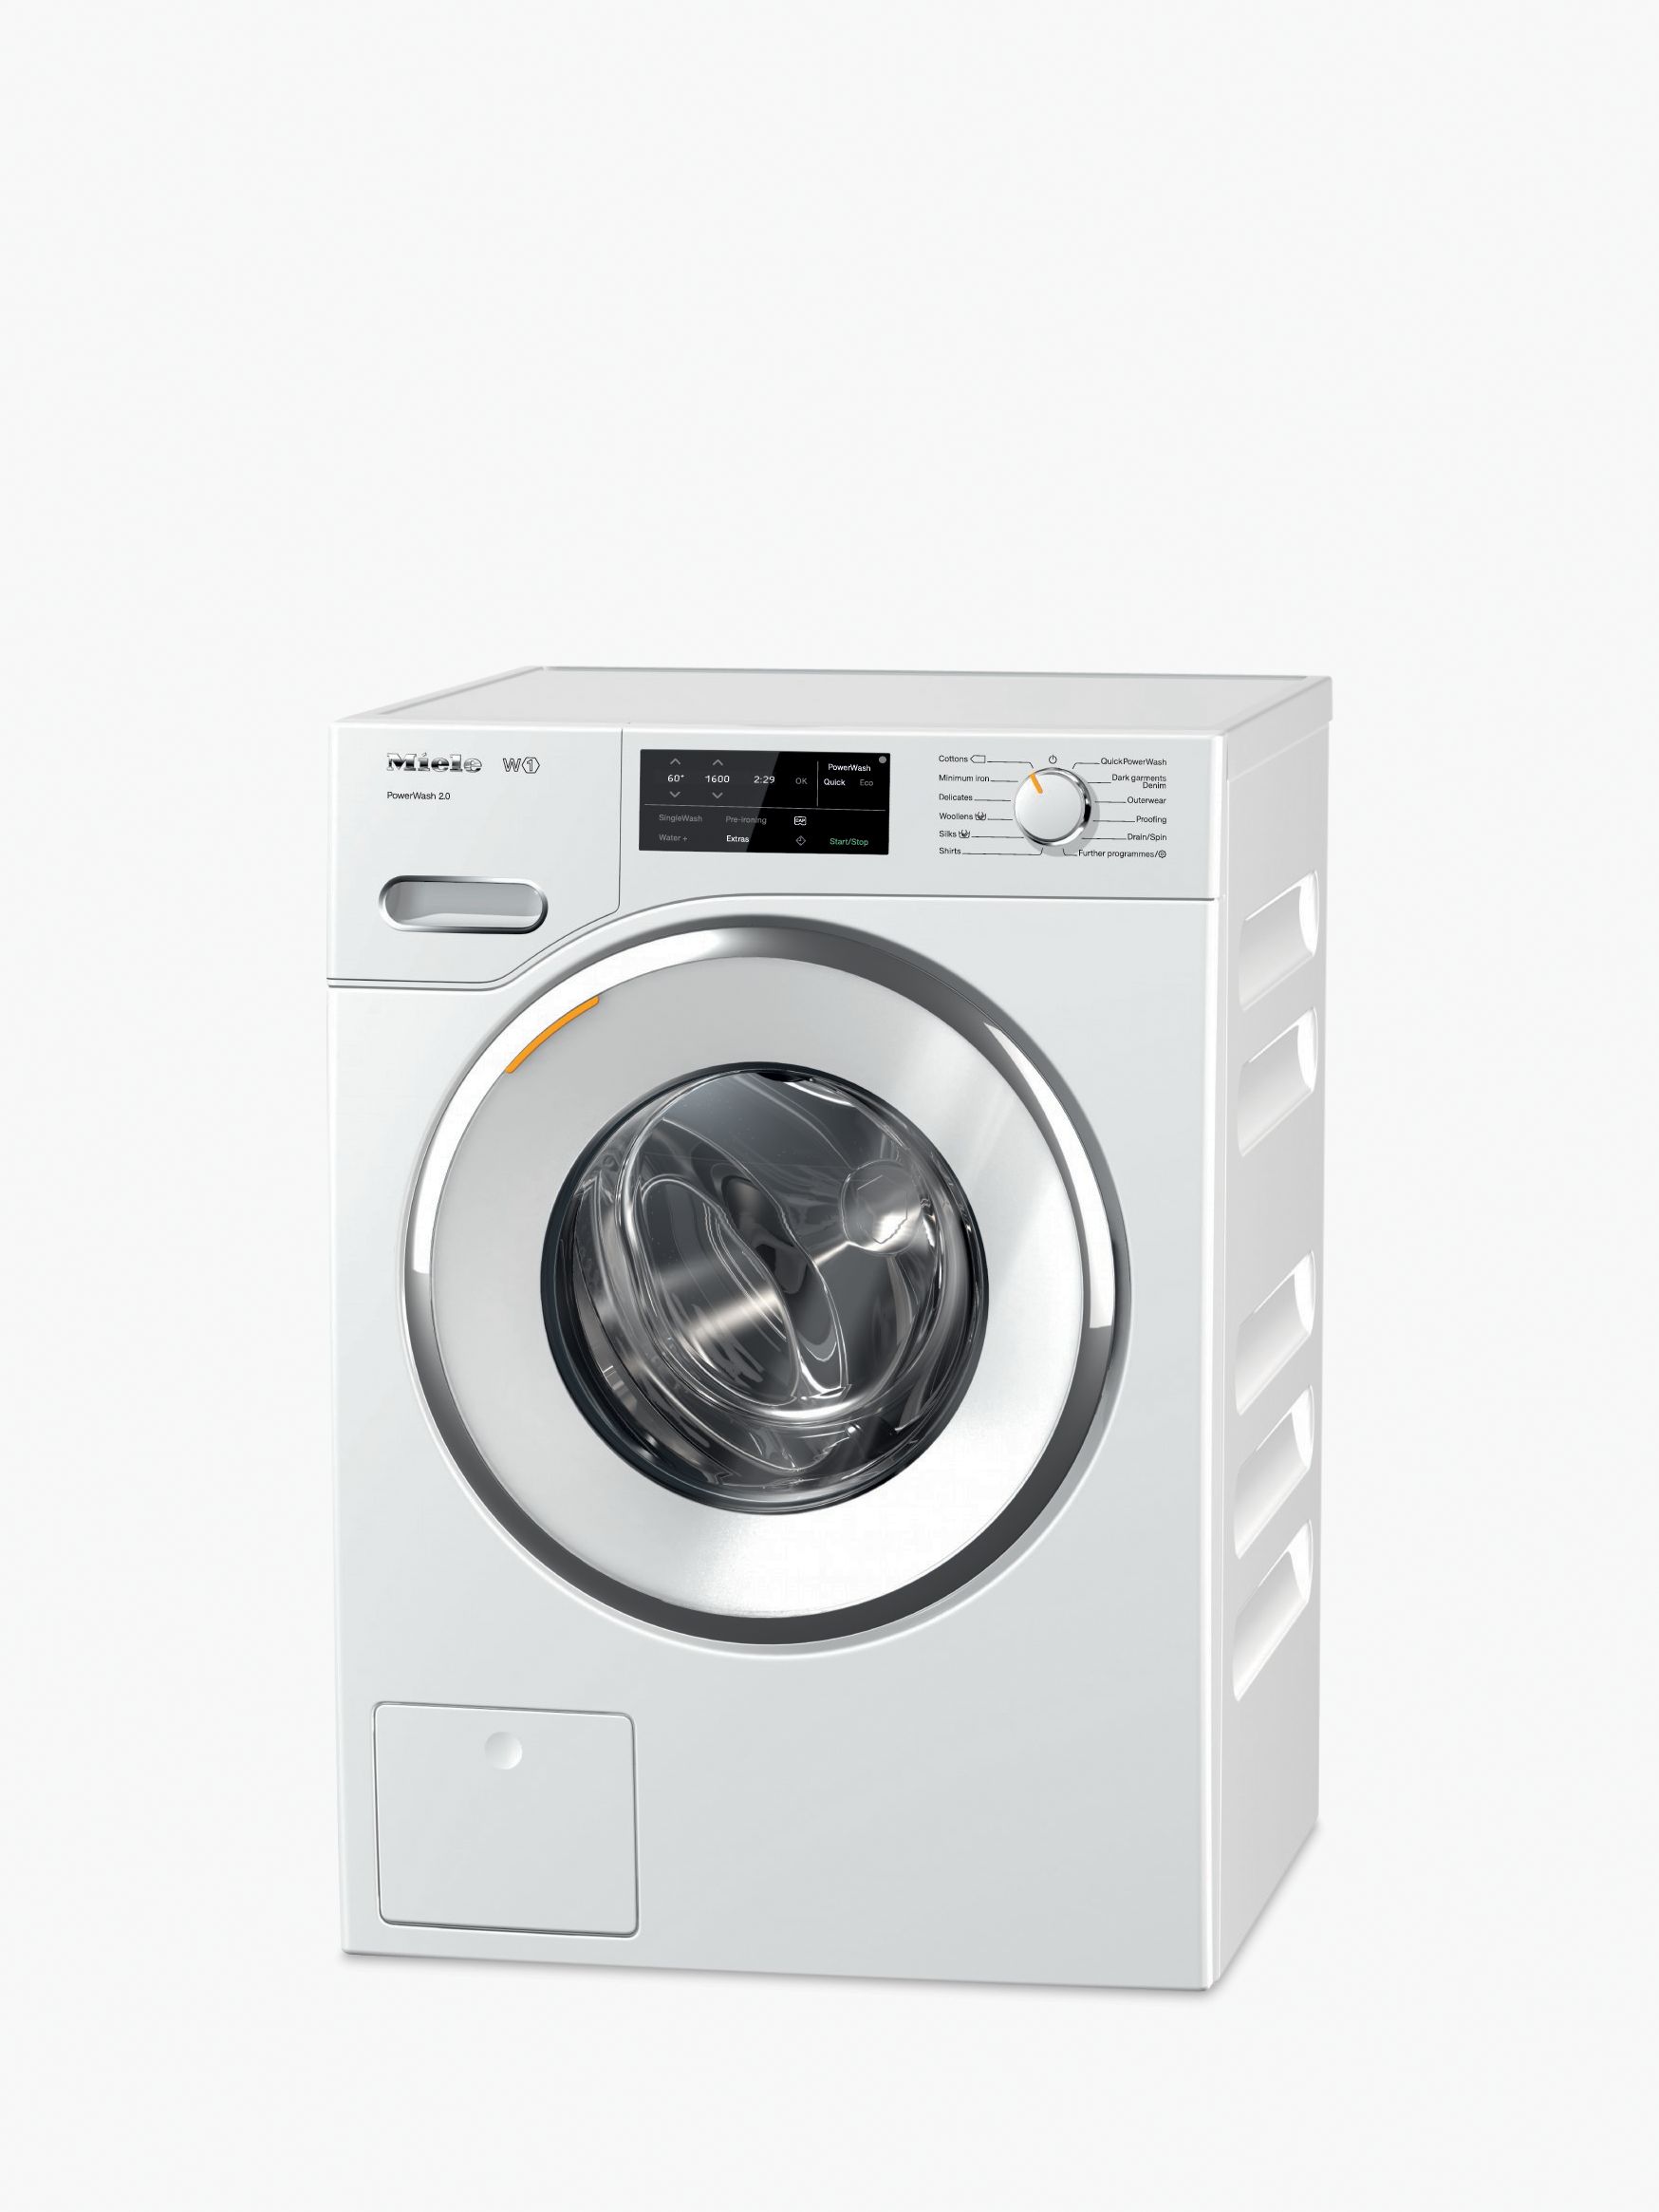 Miele WWI320 Freestanding Washing Machine, 9kg Load, A+++ Energy Rating, 1600rpm Spin, White